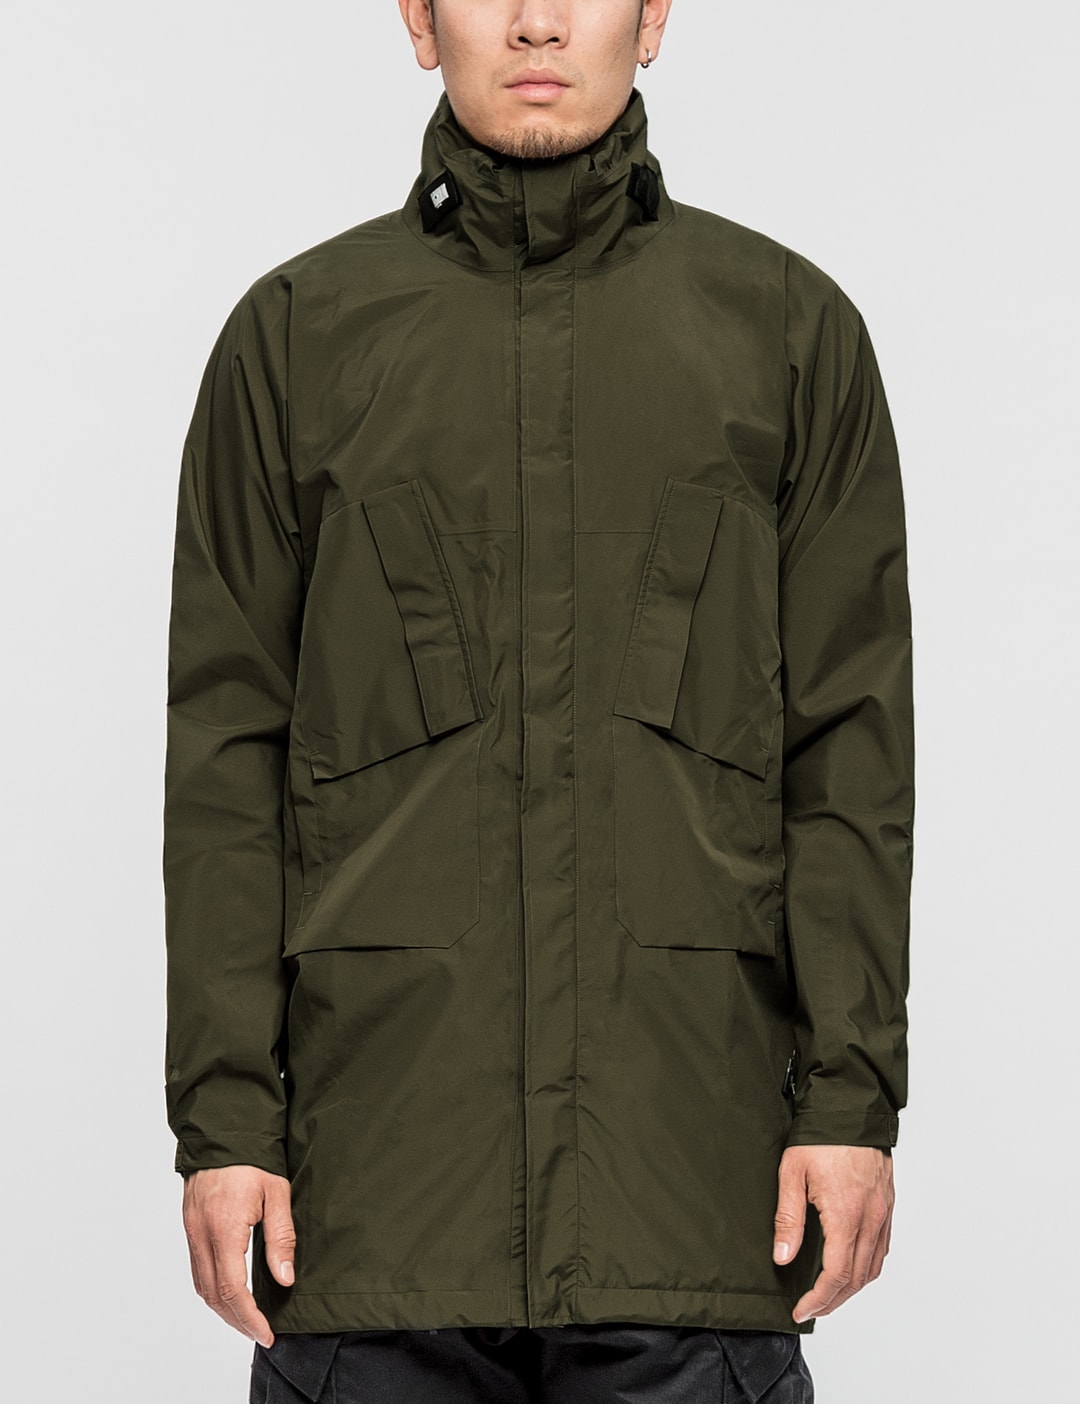 ACRONYM - Brown GT-J34 Jacket | HBX - Globally Curated Fashion and ...